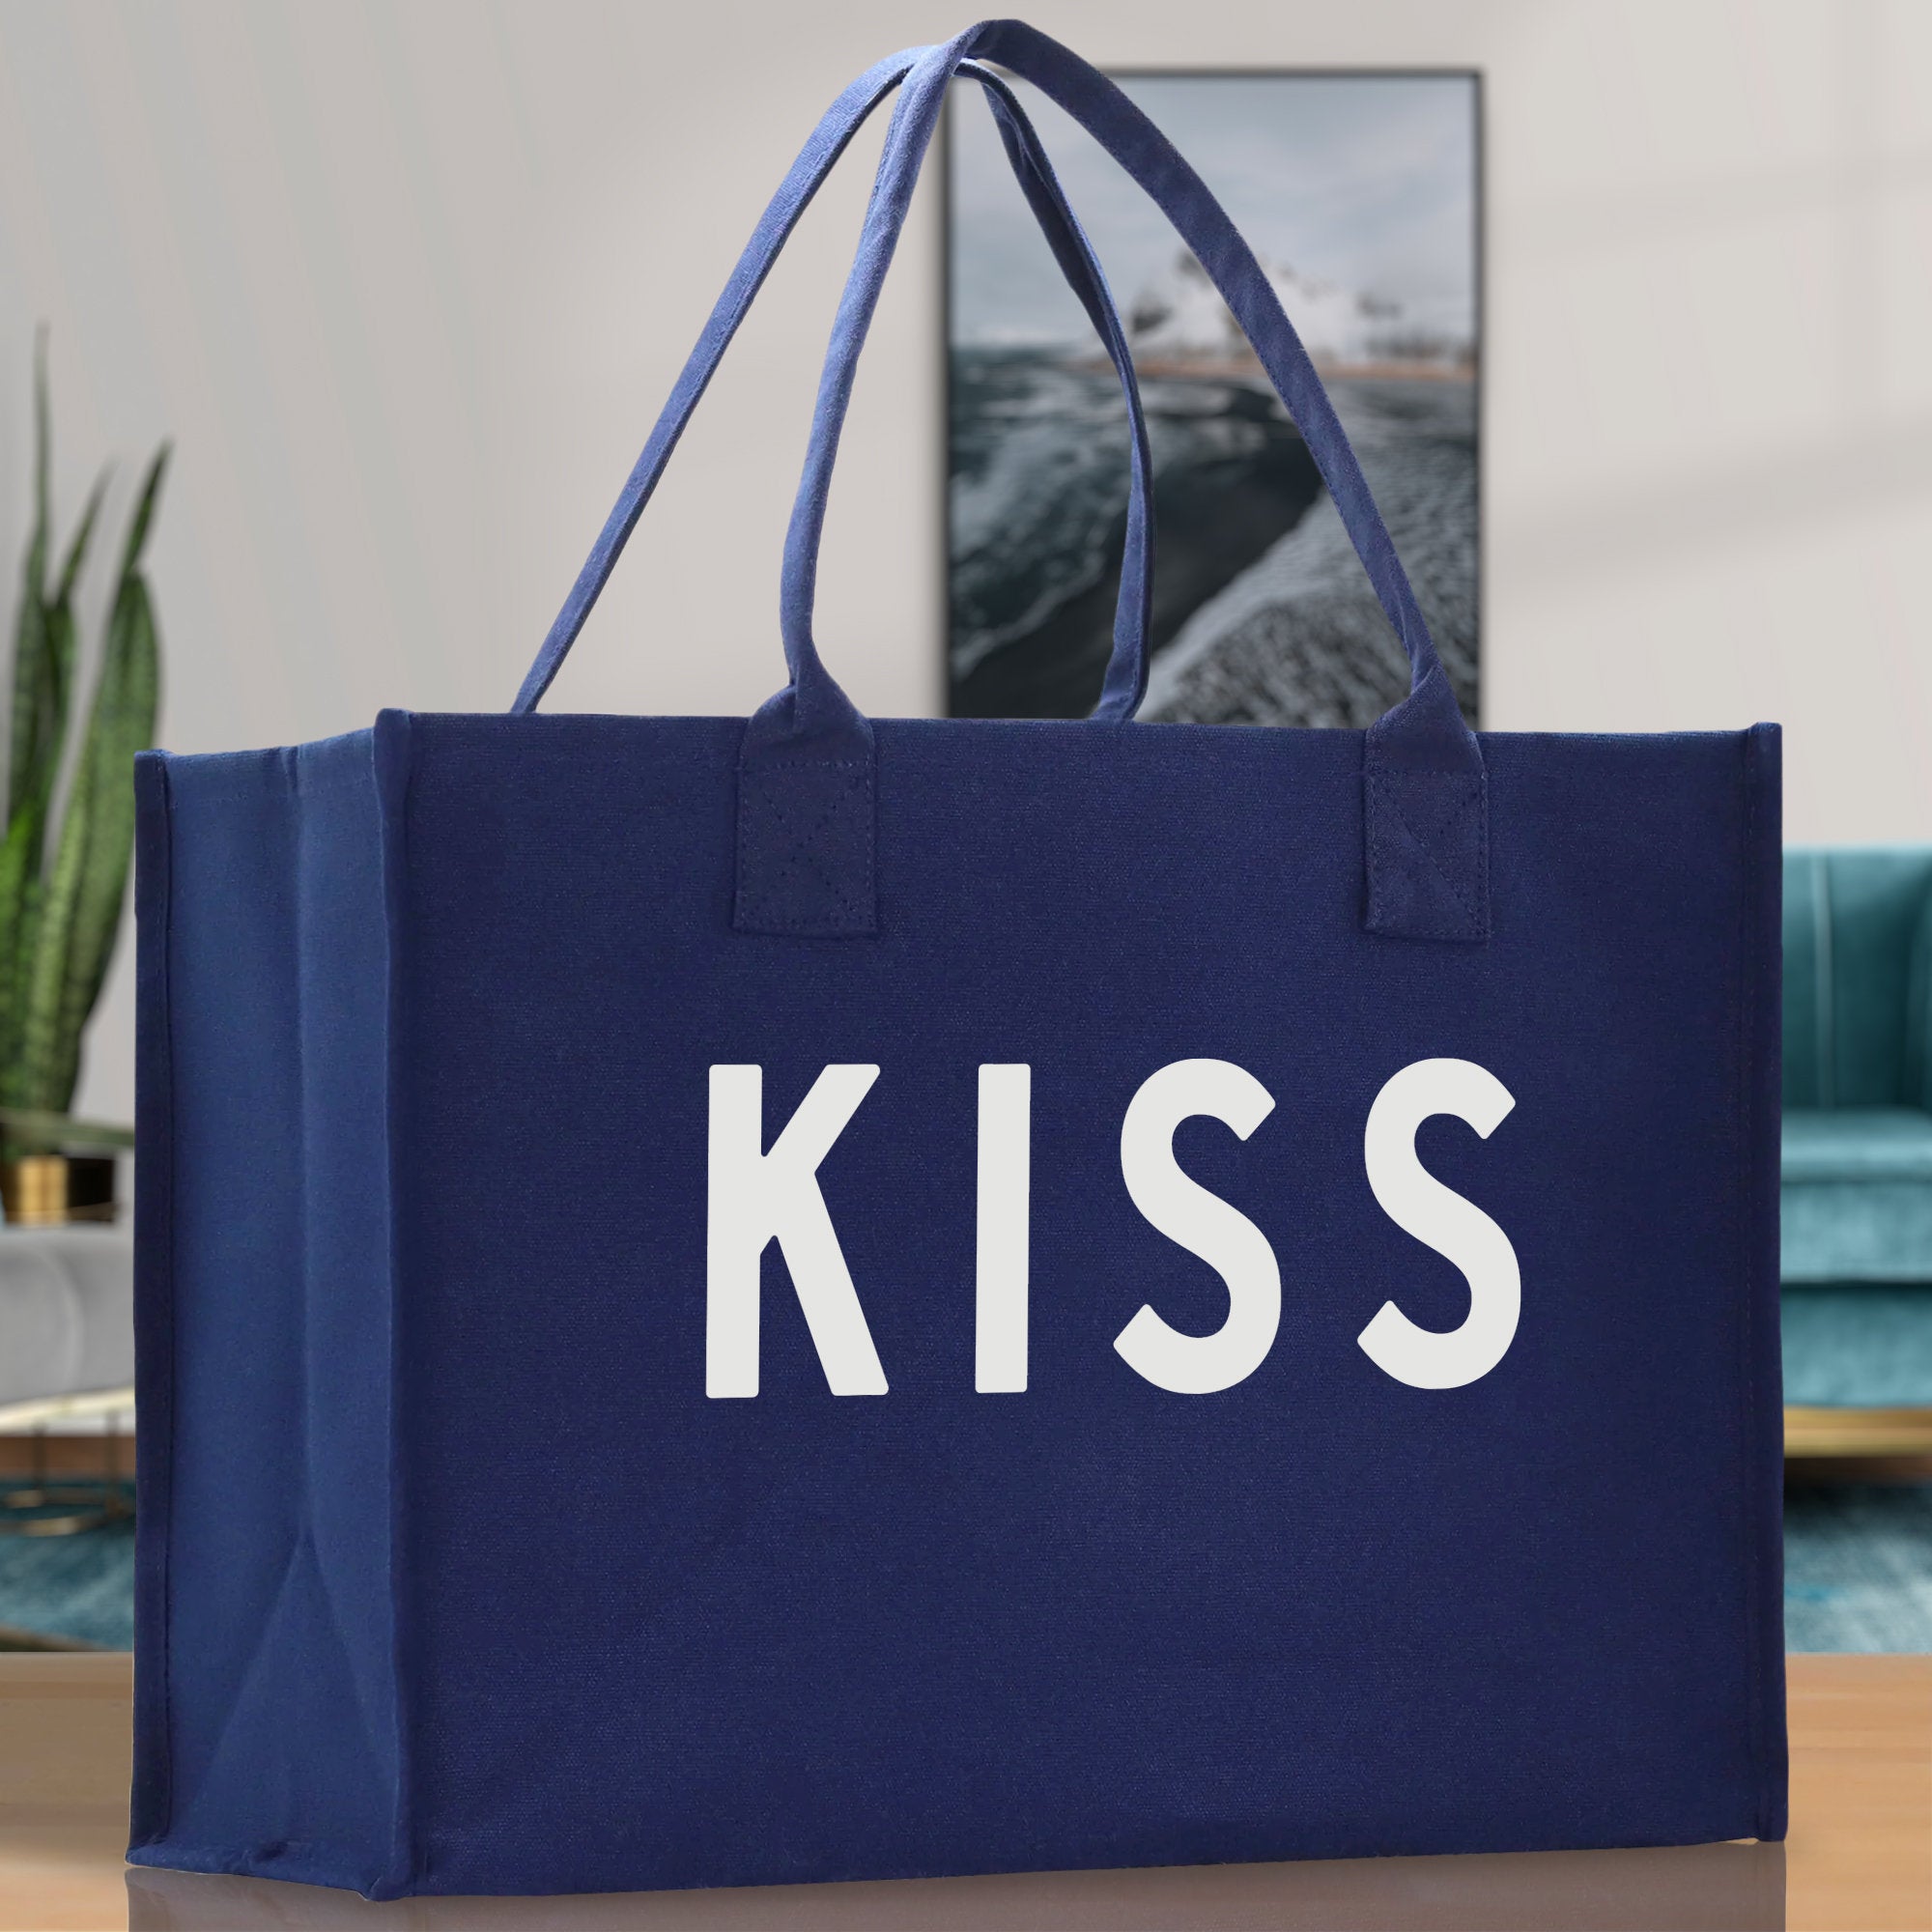 Kiss Cotton Canvas Chic Beach Tote Bag Multipurpose Tote Weekender Tote Gift for Her Outdoor Tote Vacation Tote Large Beach Bag